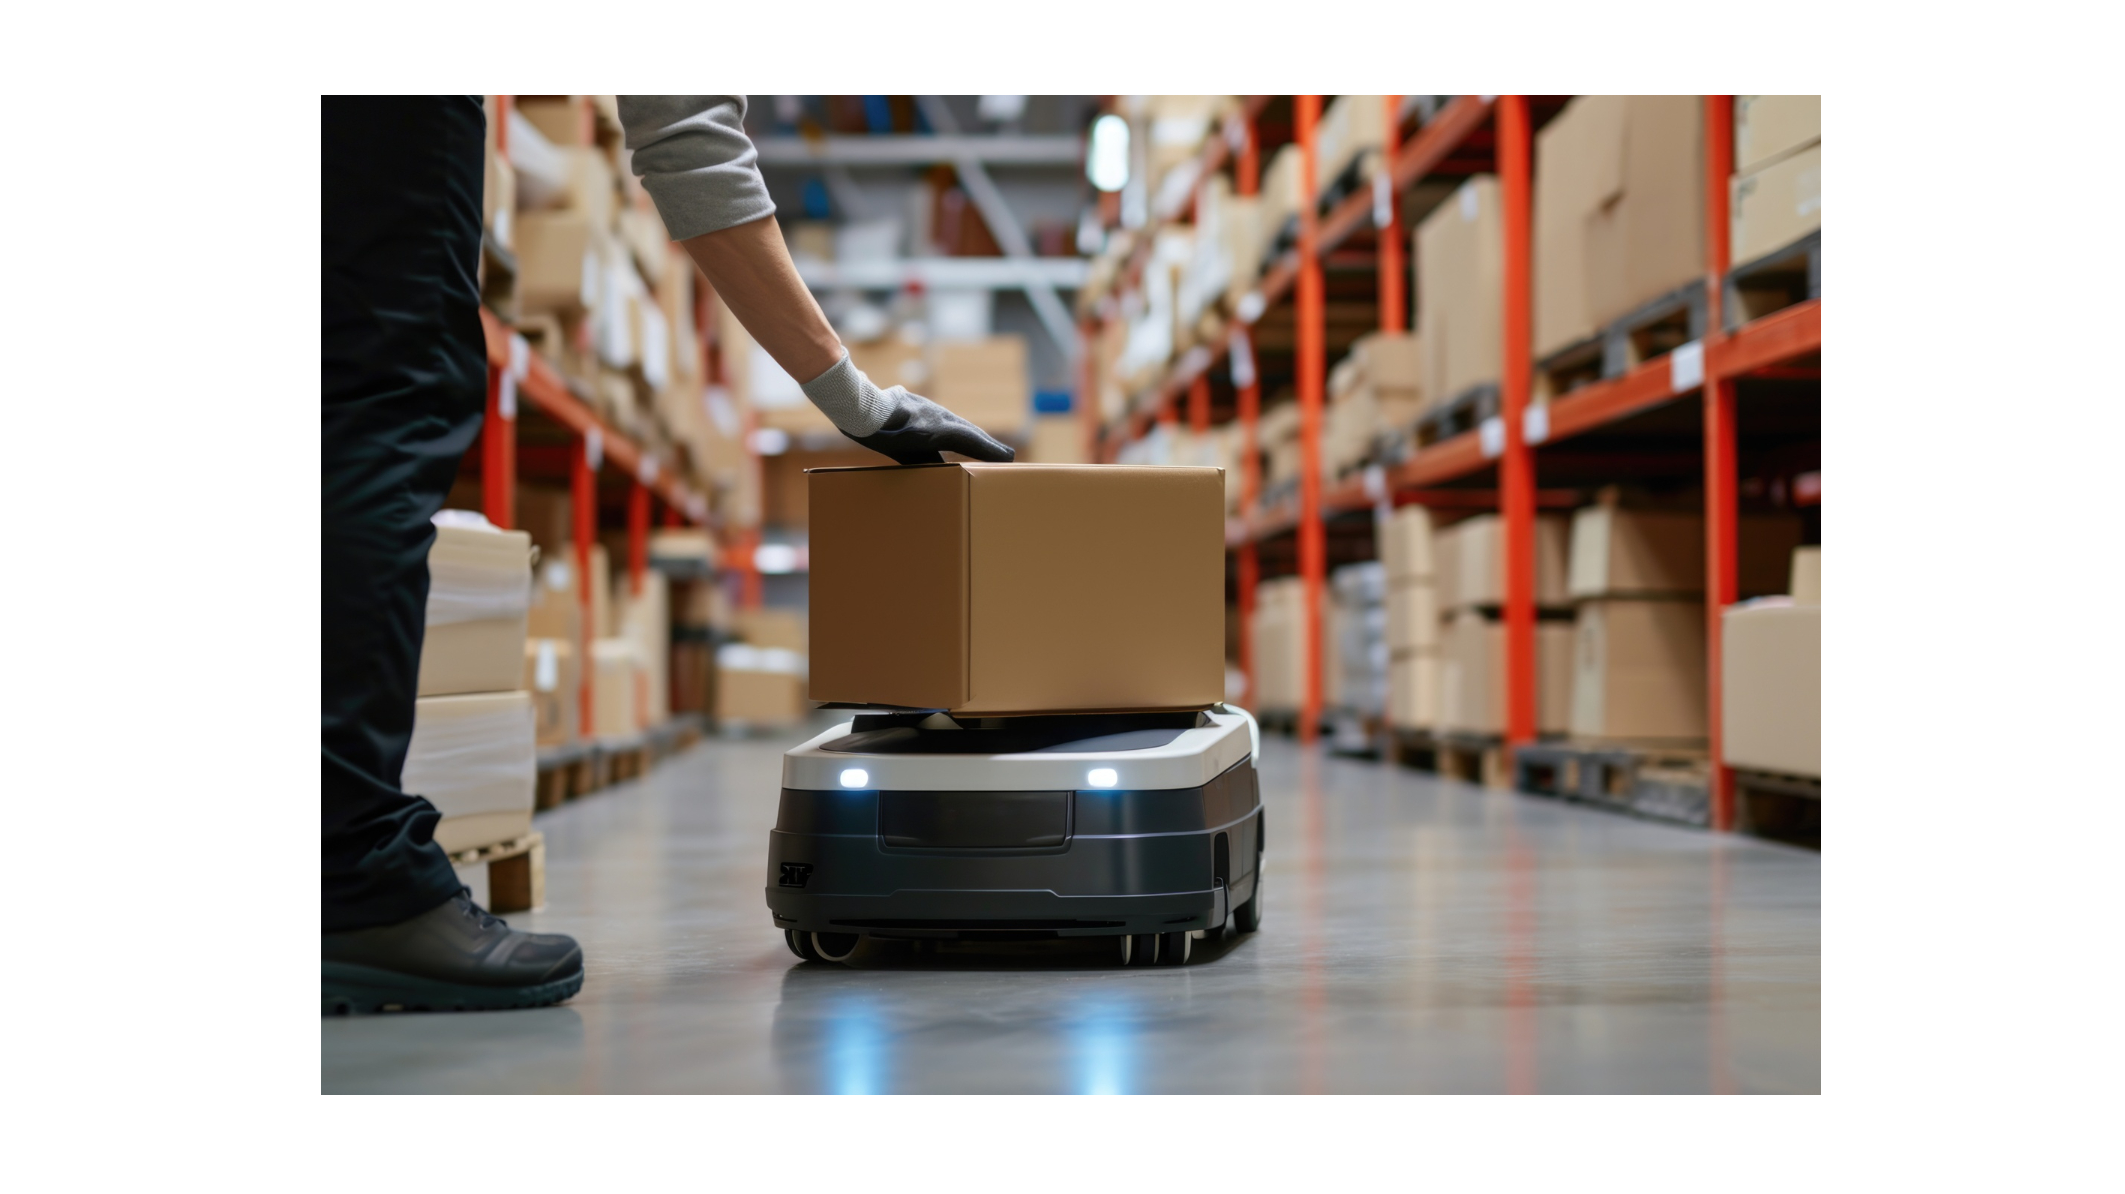 The Role of Artificial Intelligence in AGV Robot Navigation